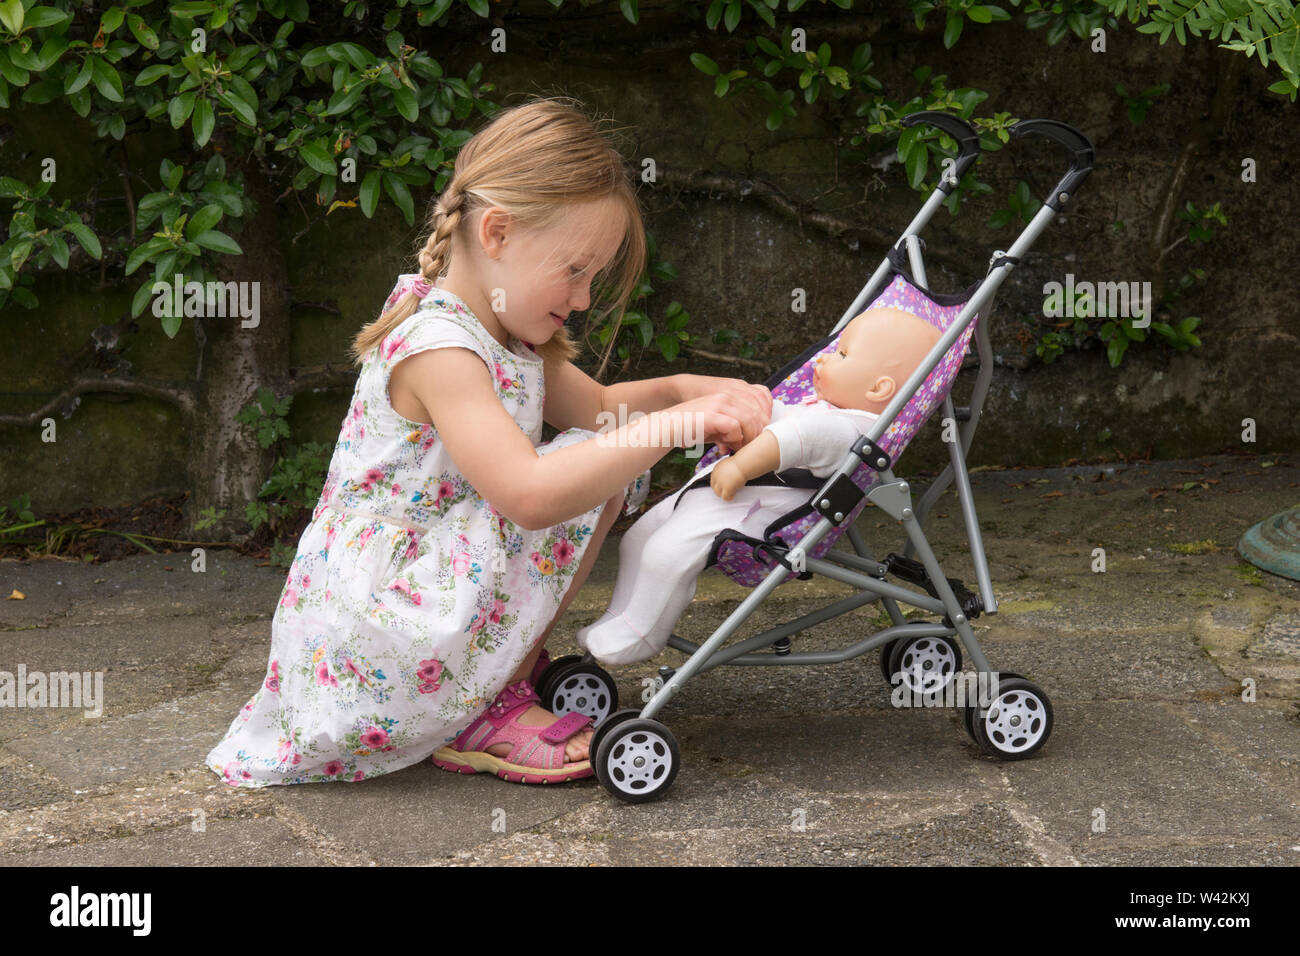 three year old child, young girl in pretty dress, fair hair in pig tails playing with doll in toy pushchair, outside in garden, UK Stock Photo